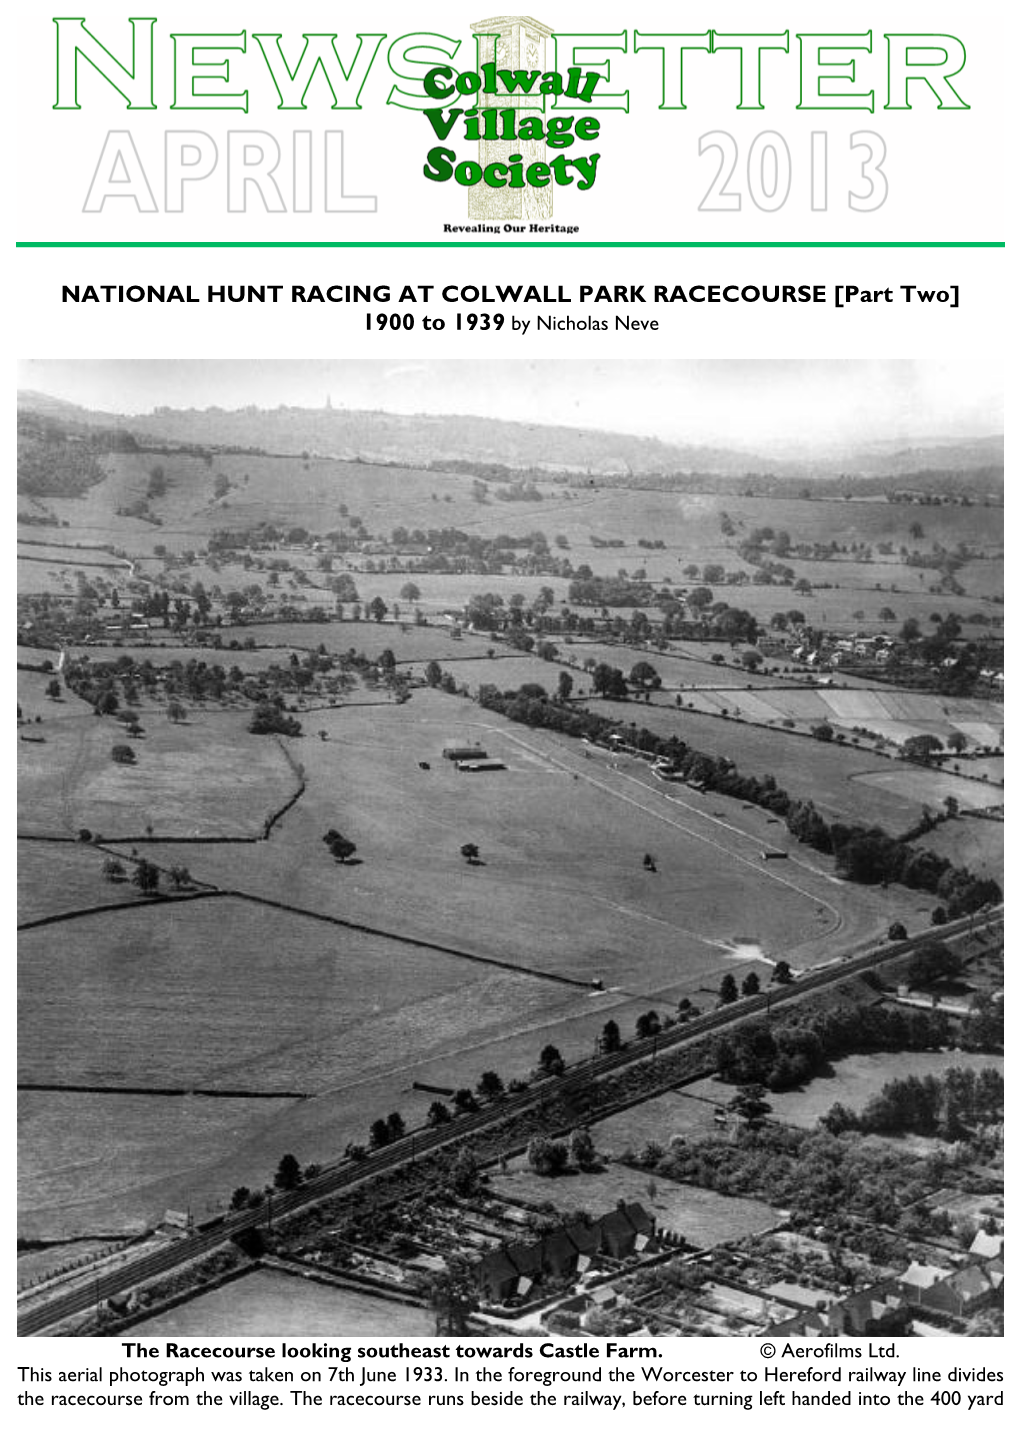 NATIONAL HUNT RACING at COLWALL PARK RACECOURSE [Part Two] 1900 to 1939 by Nicholas Neve